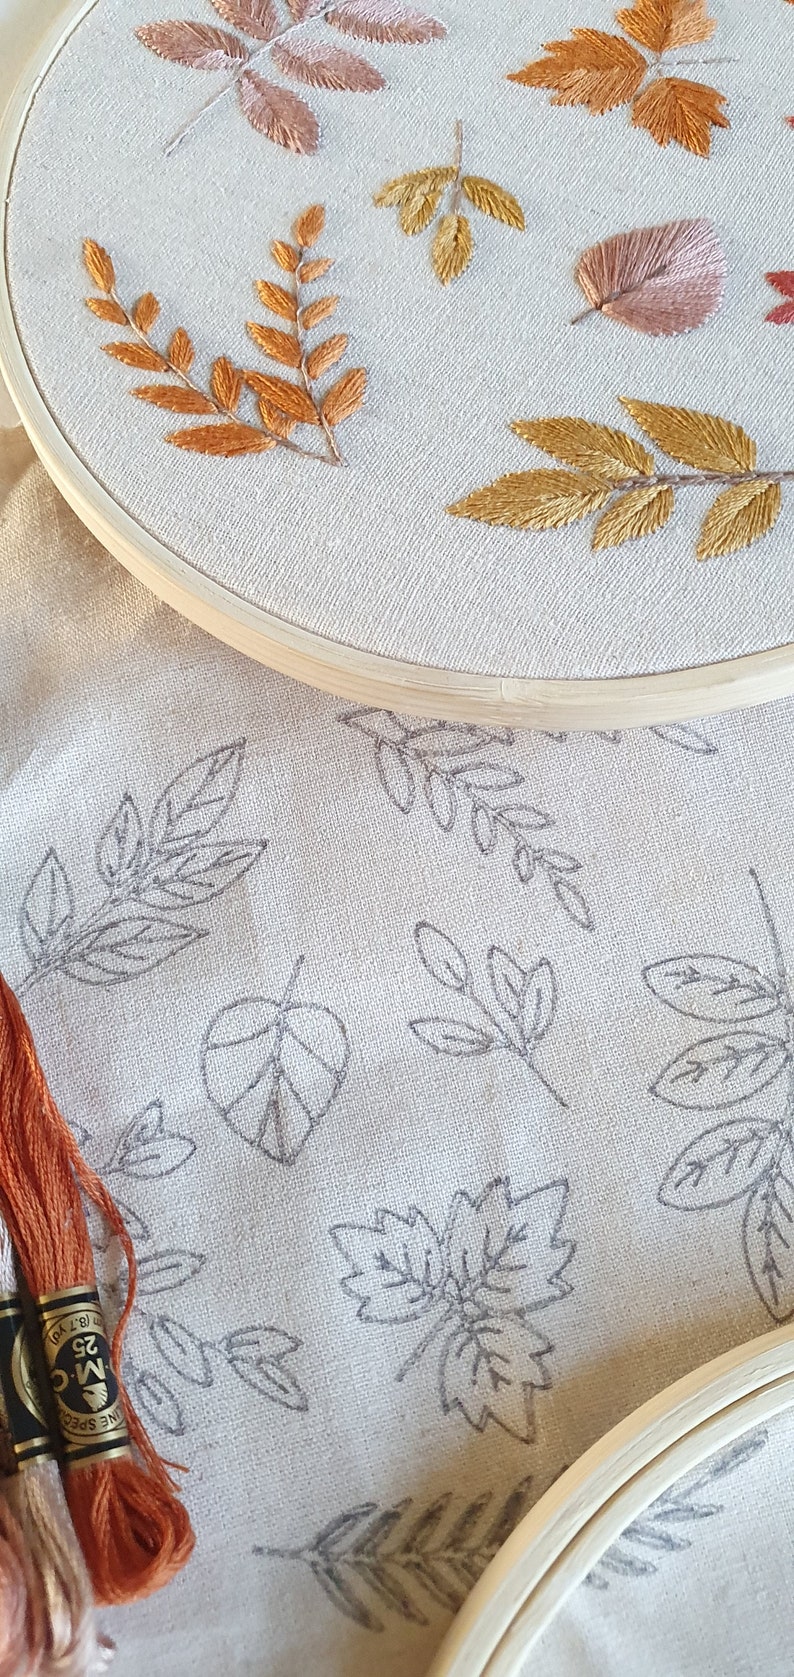 FALL AUTUMN Leaves EMBROIDERY Pattern Stick And Stitch Washaway Stabilizer Clothes Bags Jumpers Hoodies T-Shirts Embroidery Hoop image 3